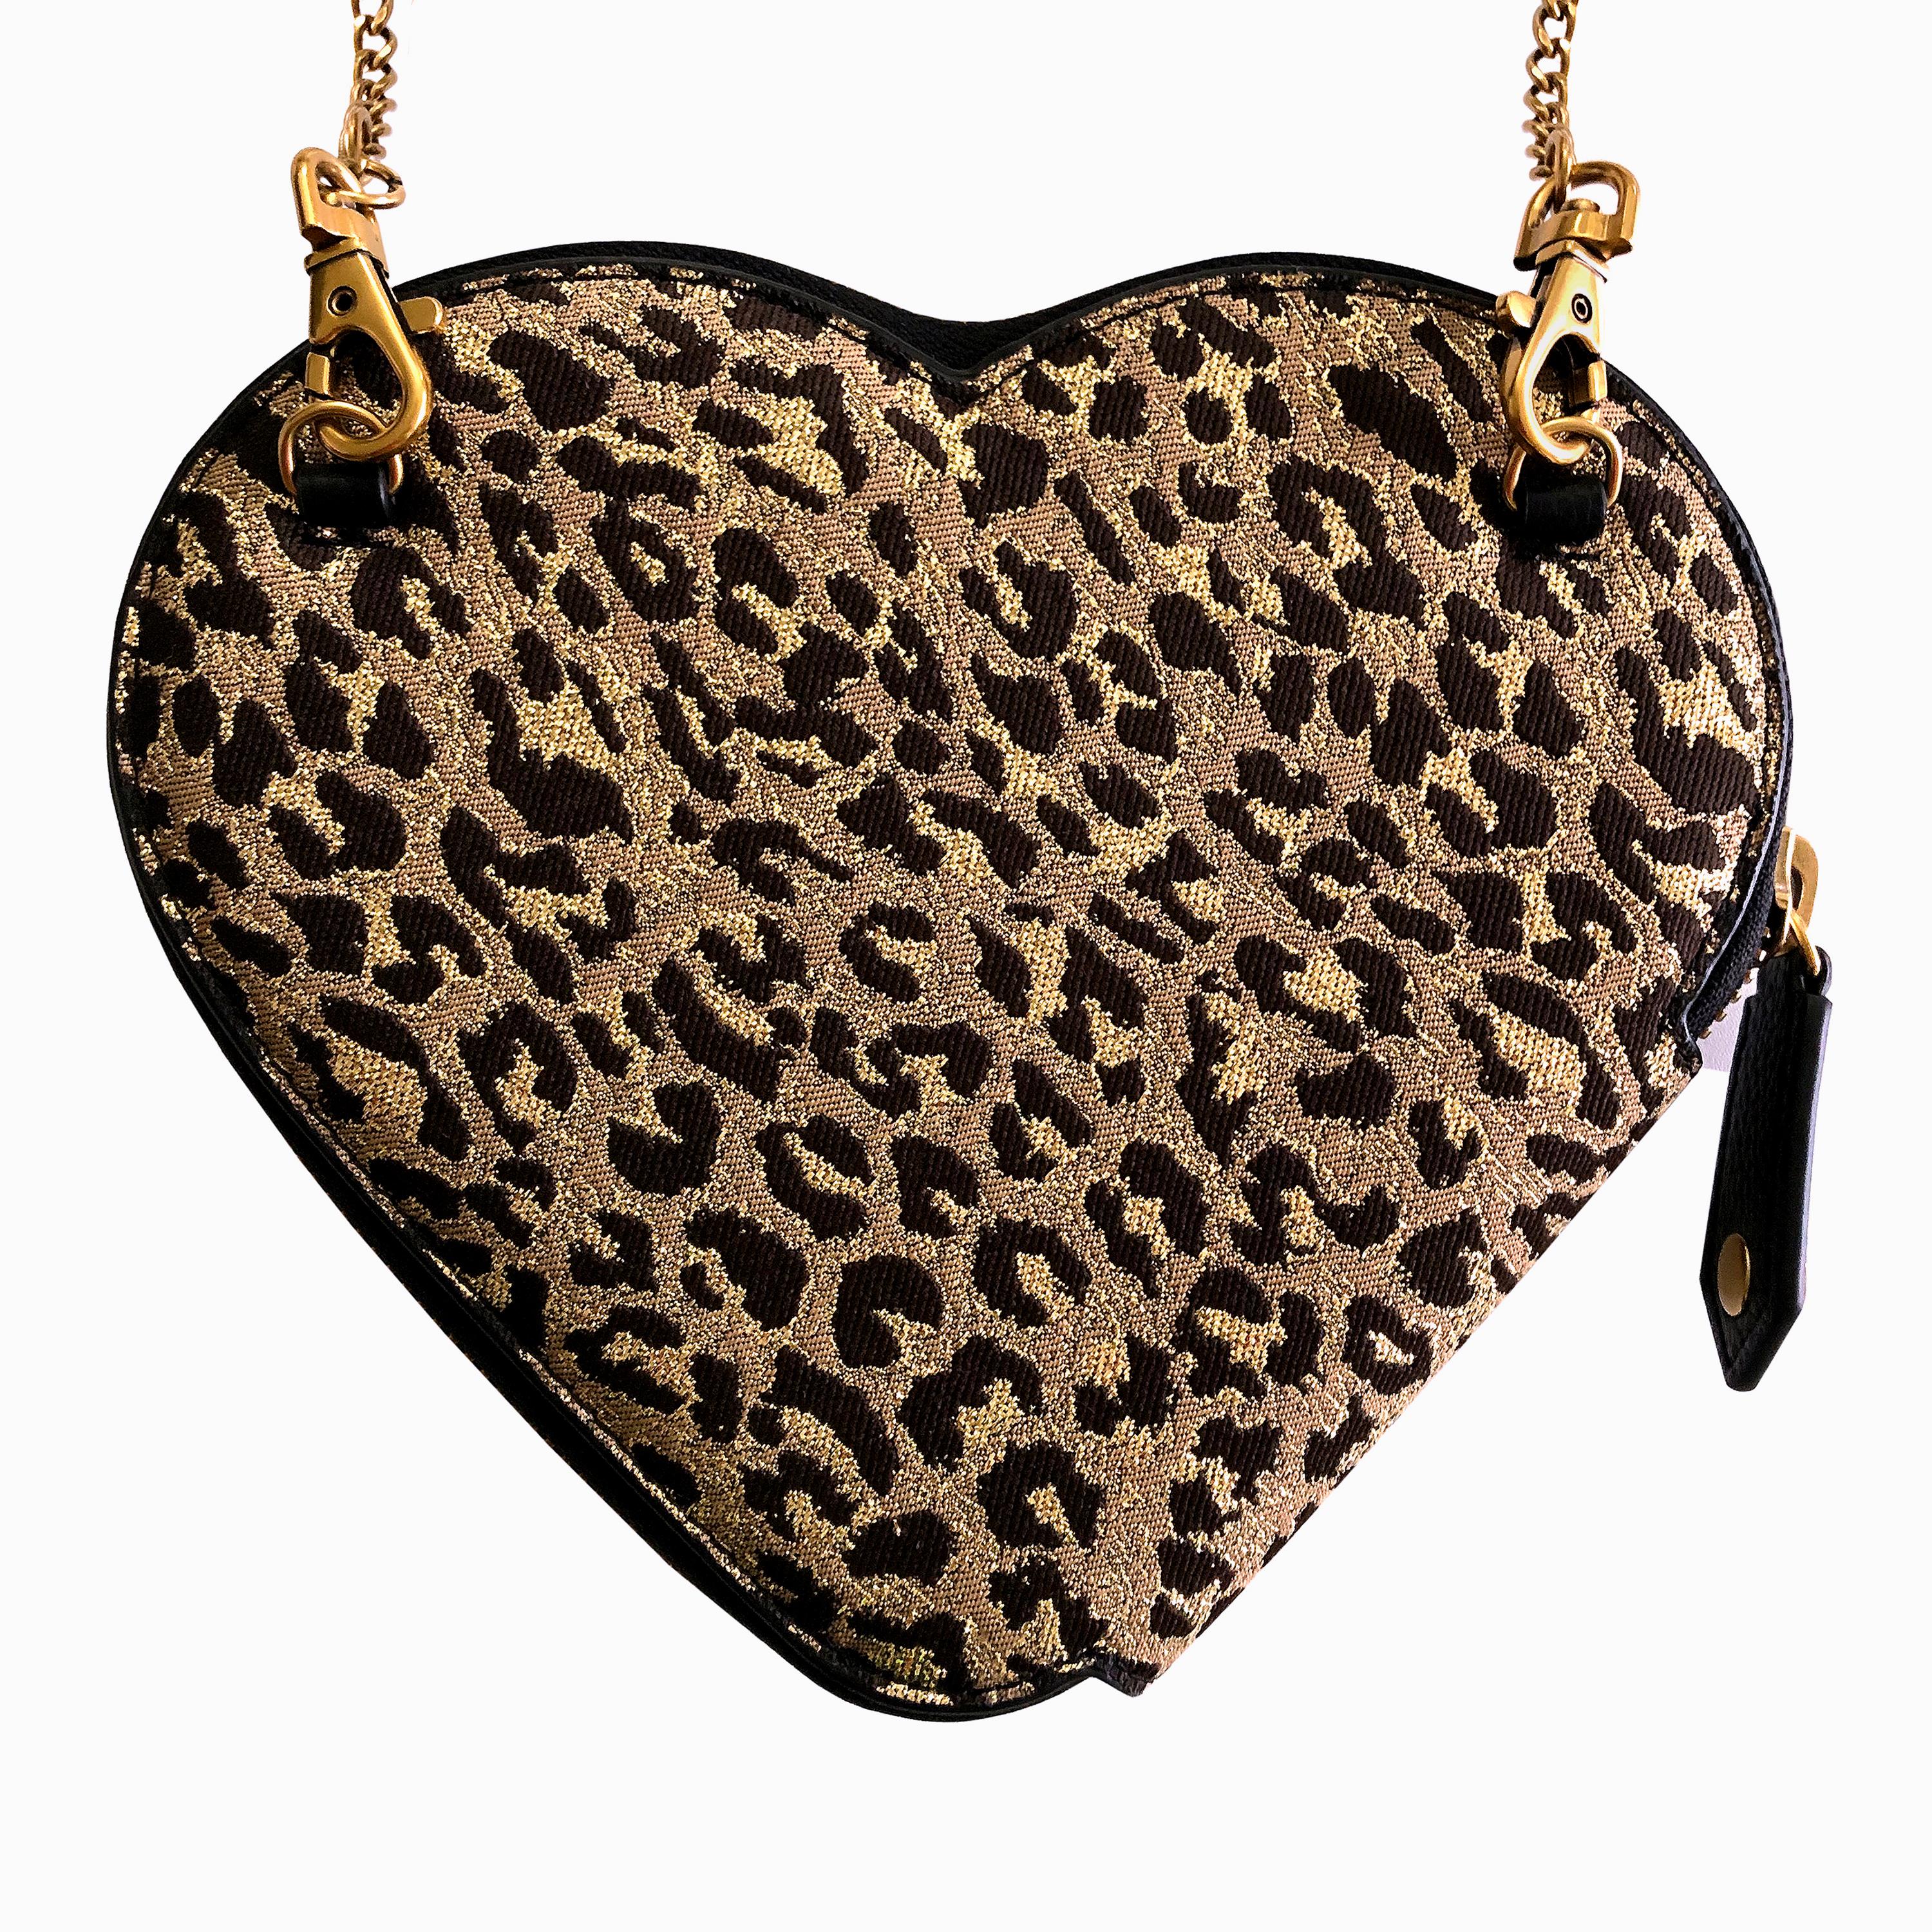 Vivienne Westwood - Heart Crossbody Bag - Gold Leopard Jacquard - NEW With Tags For Sale 1